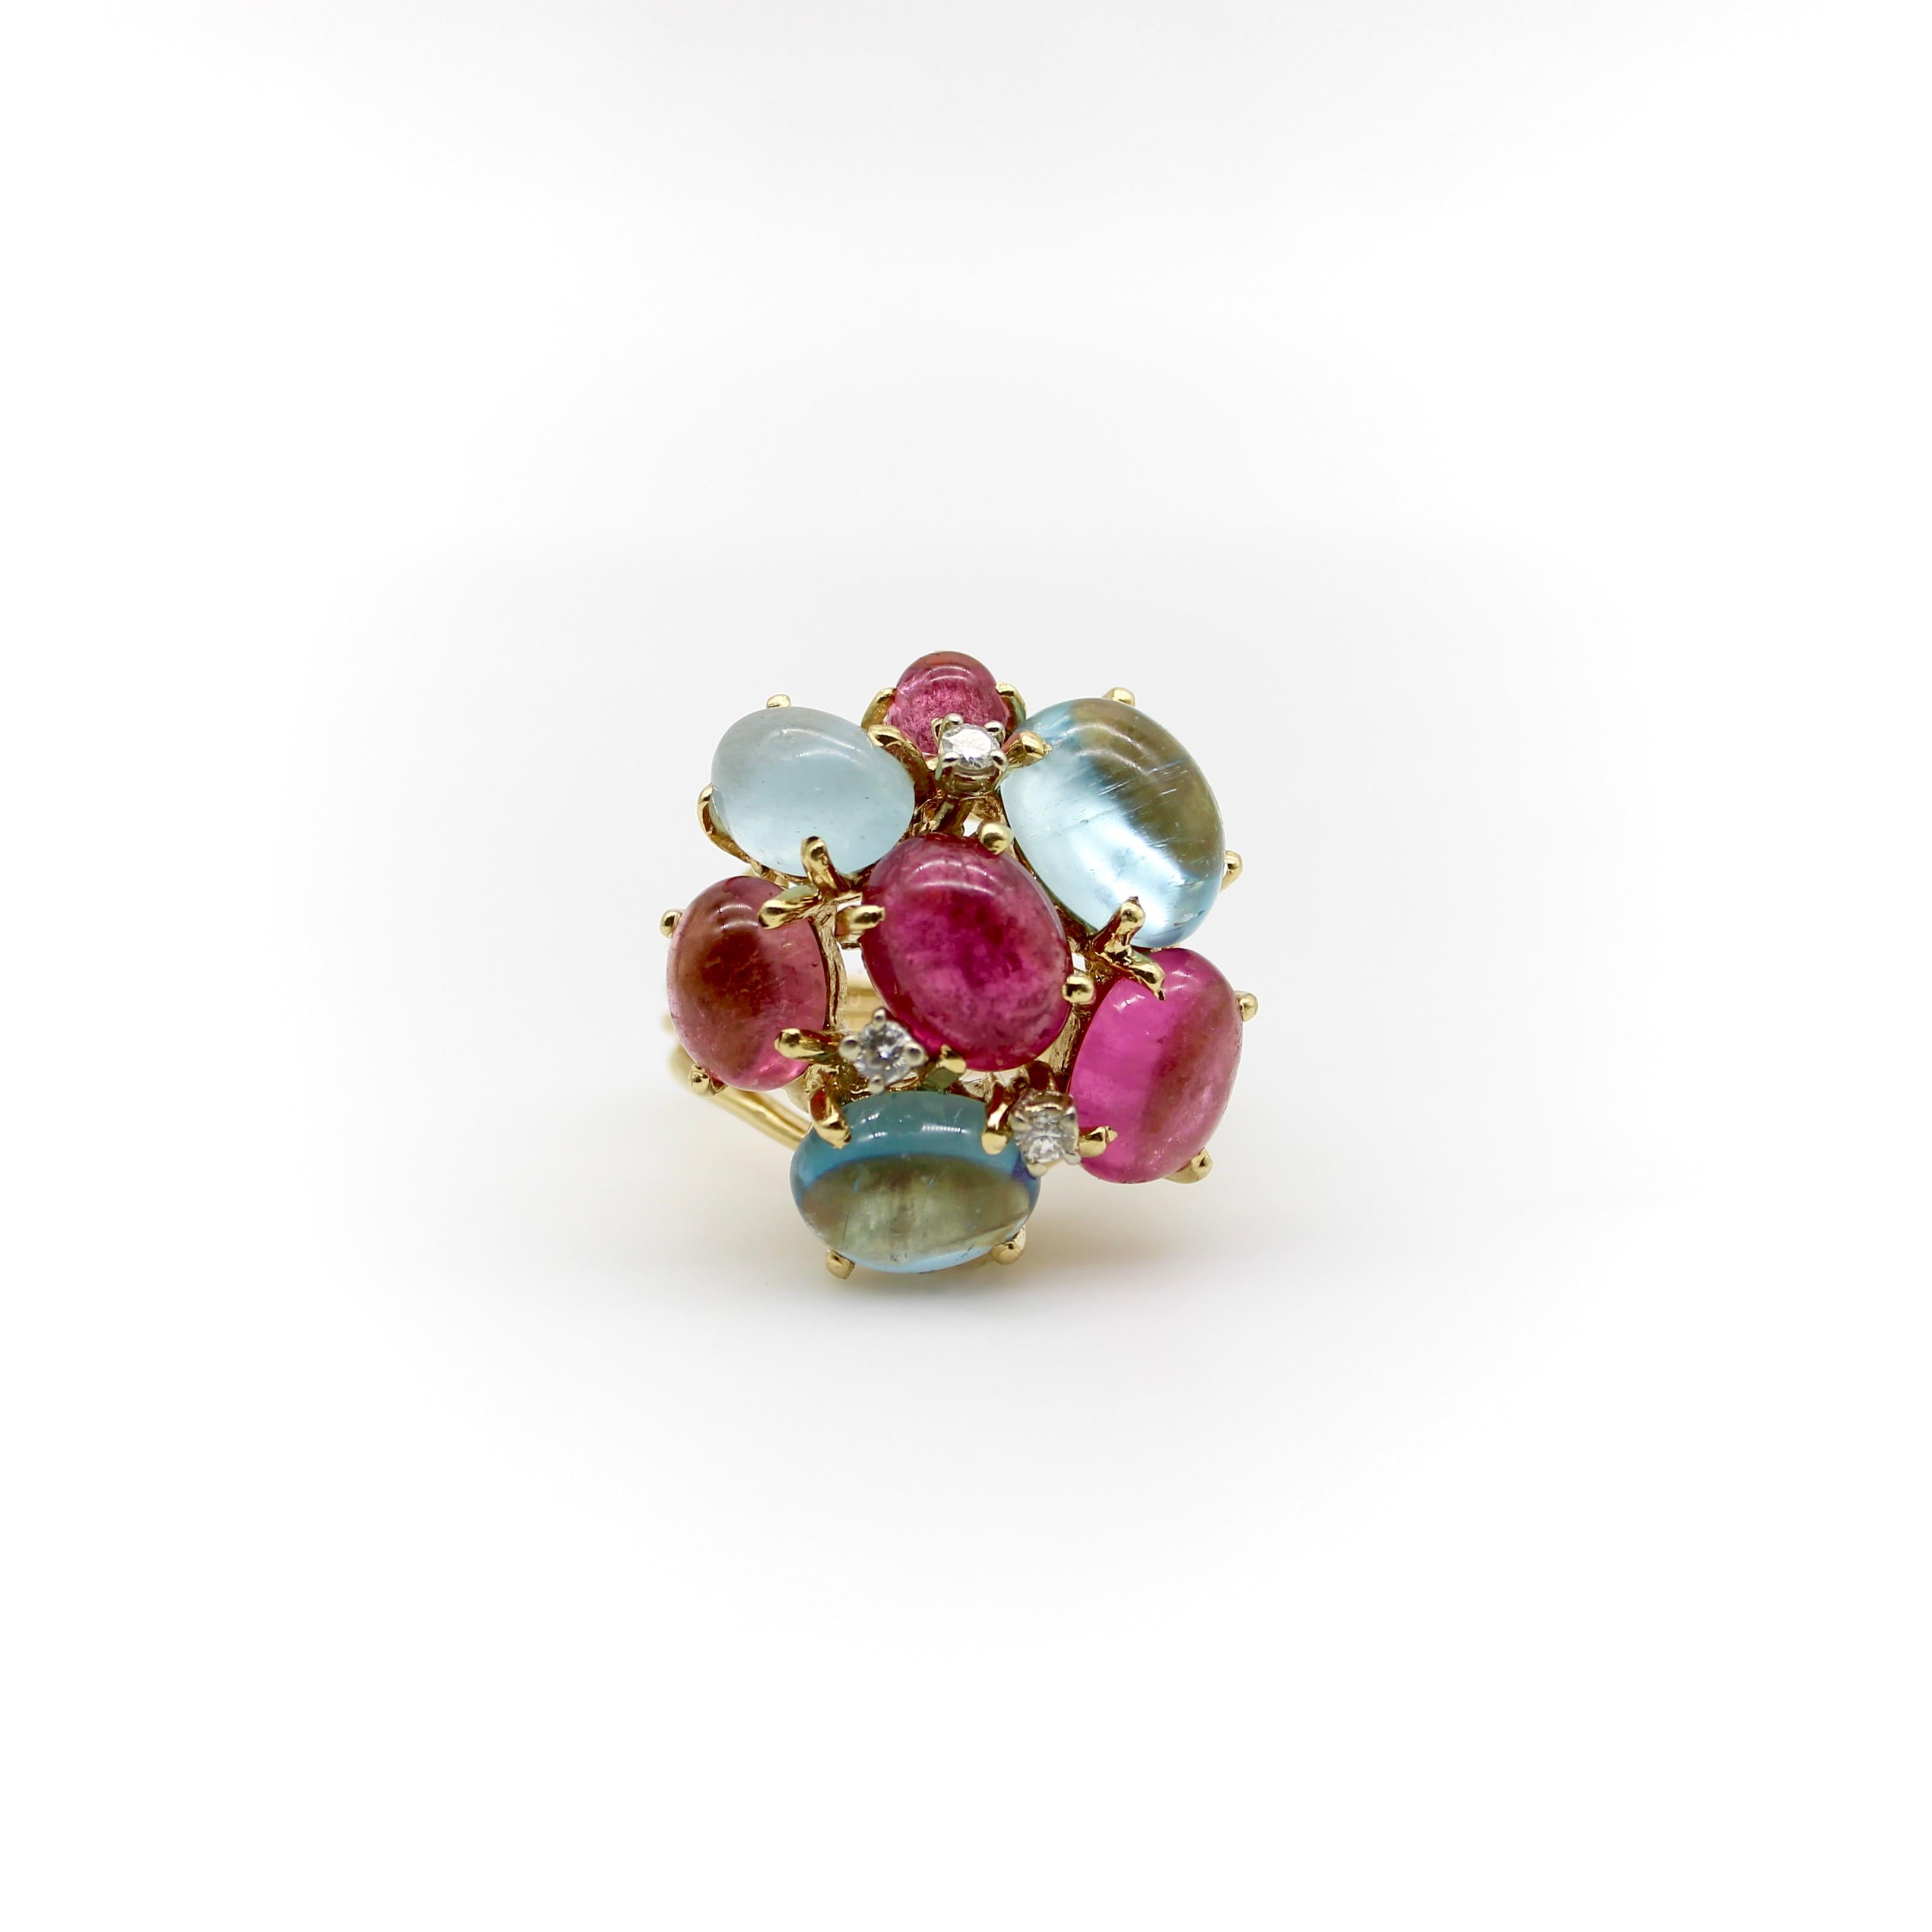 This 14k gold vintage cocktail ring is a combination of beautiful aquamarine and pink tourmaline cabochons in various sizes of ovals. The stones are prong set and offer a fun, delicious candy-like ring. Three round cut diamonds are interspersed